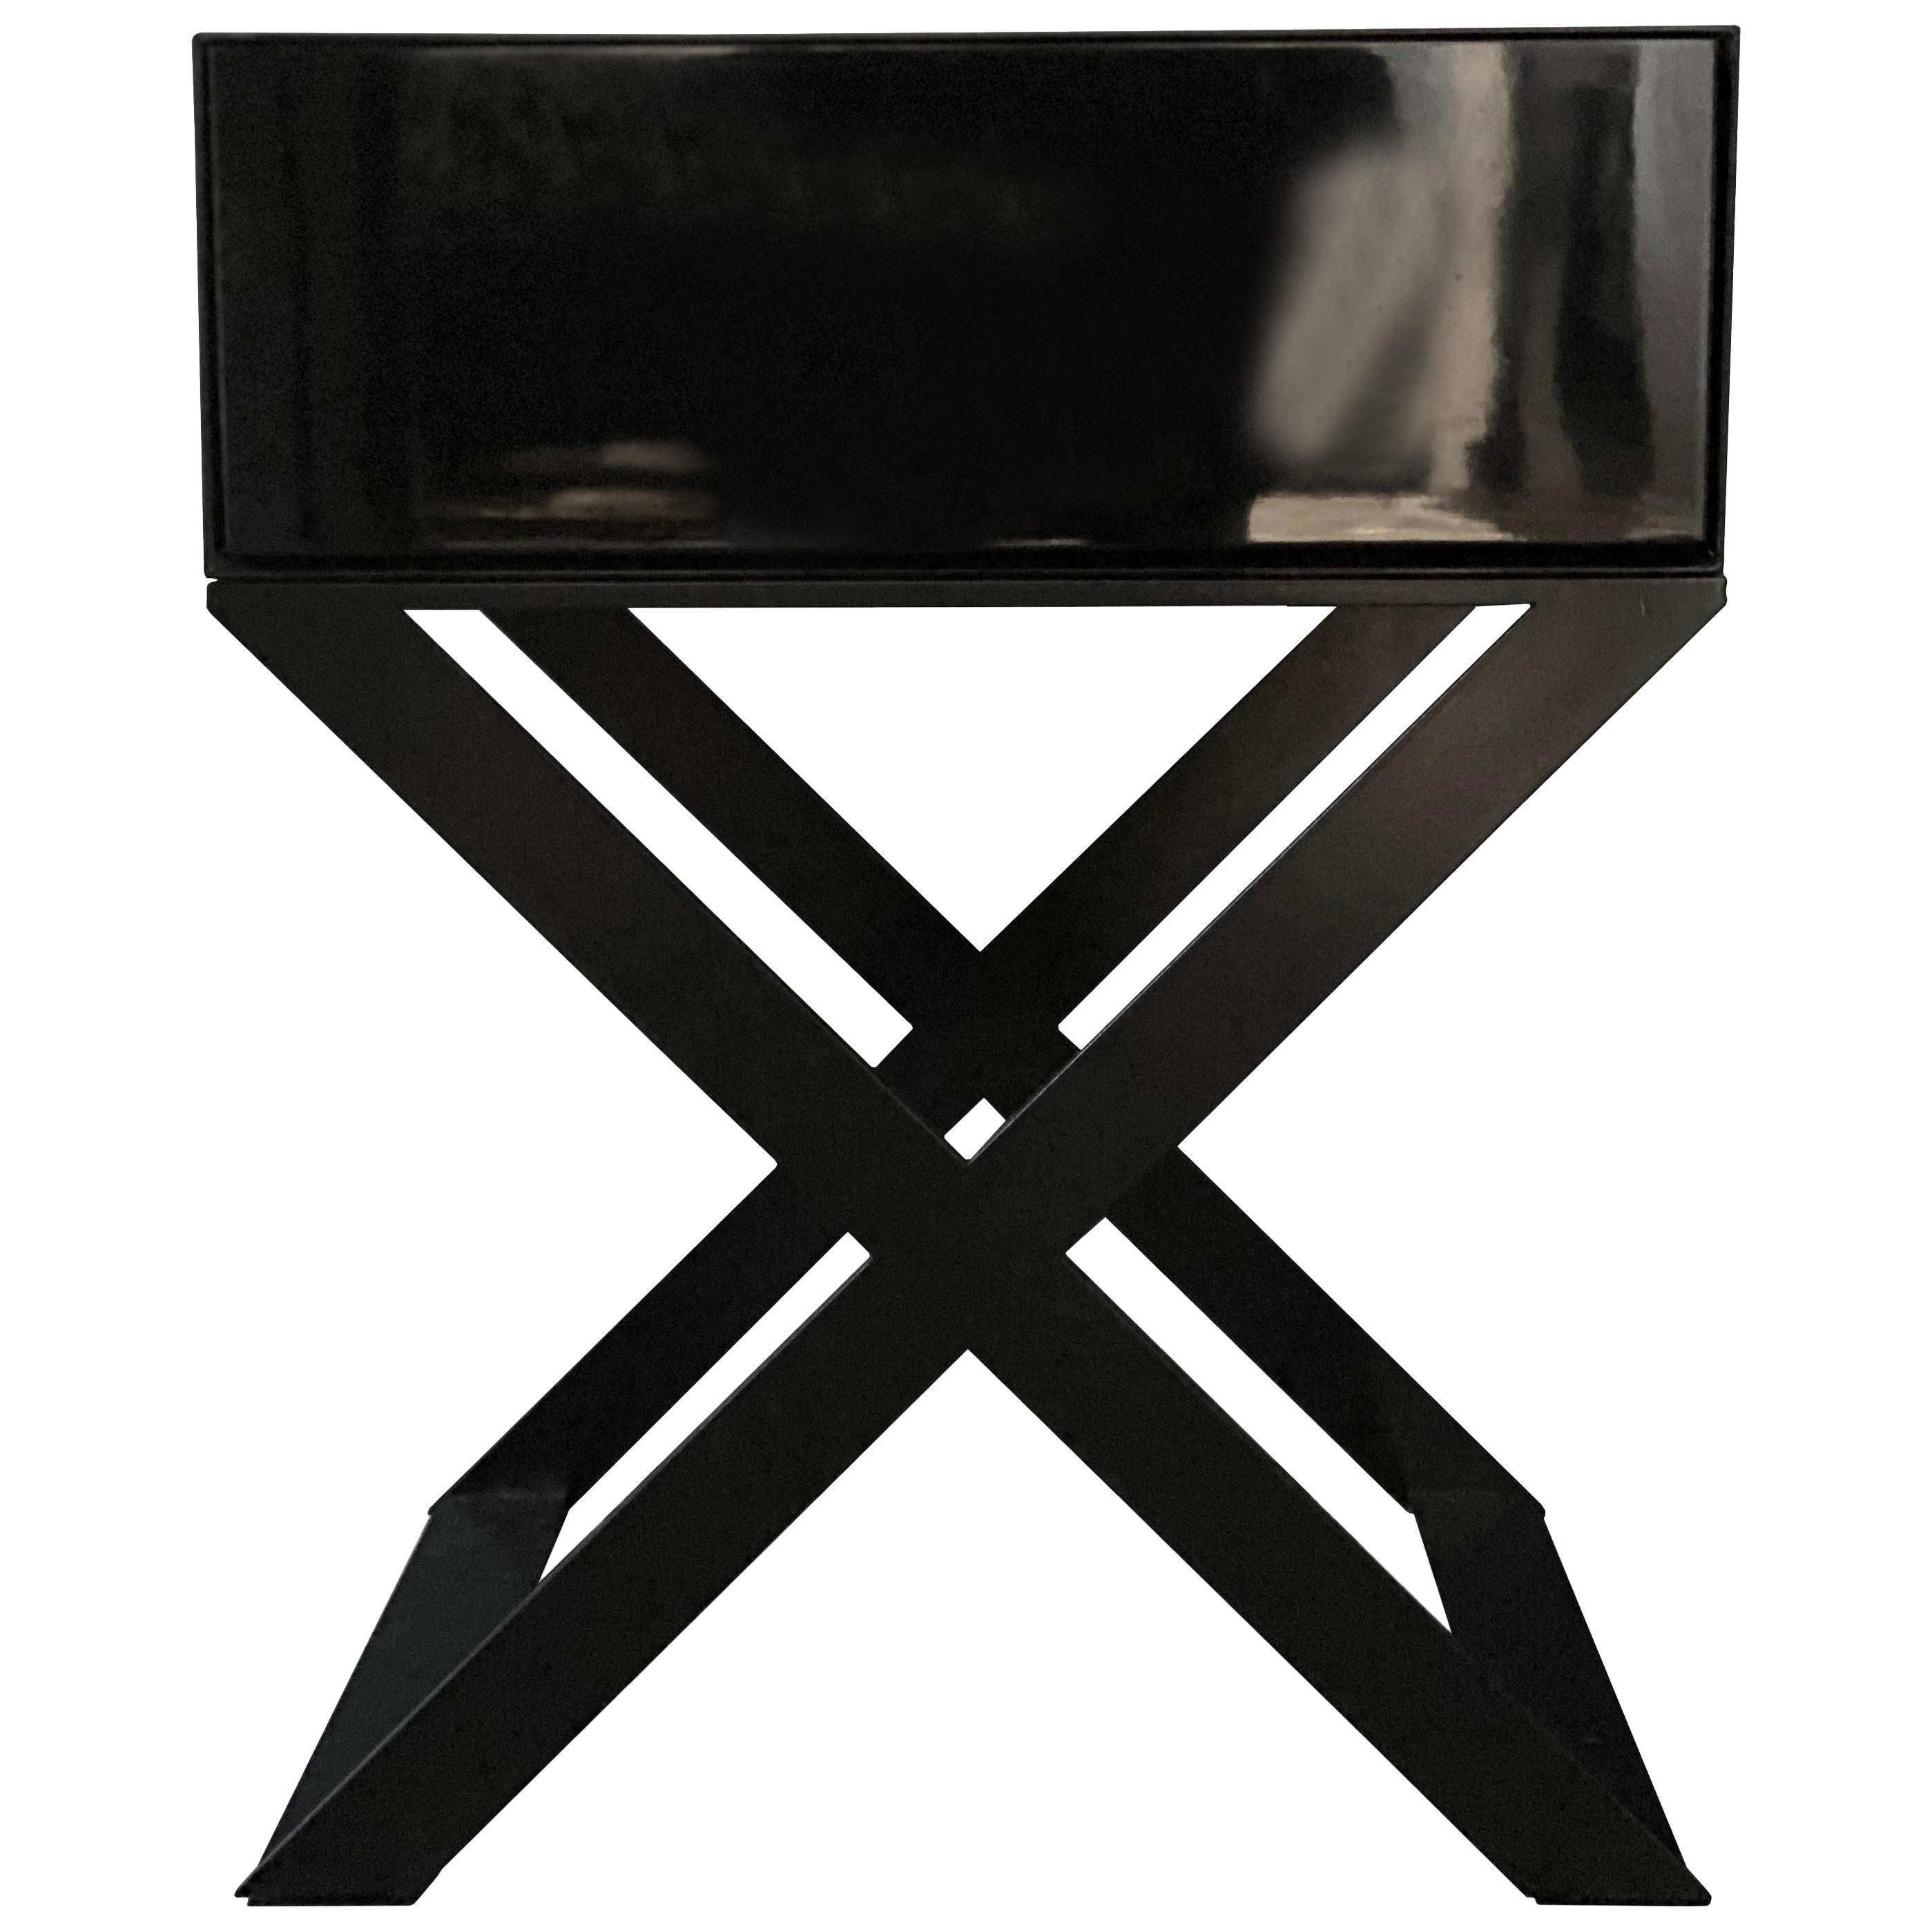 X-Leg Bedside Table in Black Lacquered and Black Powder Coated Steel Legs